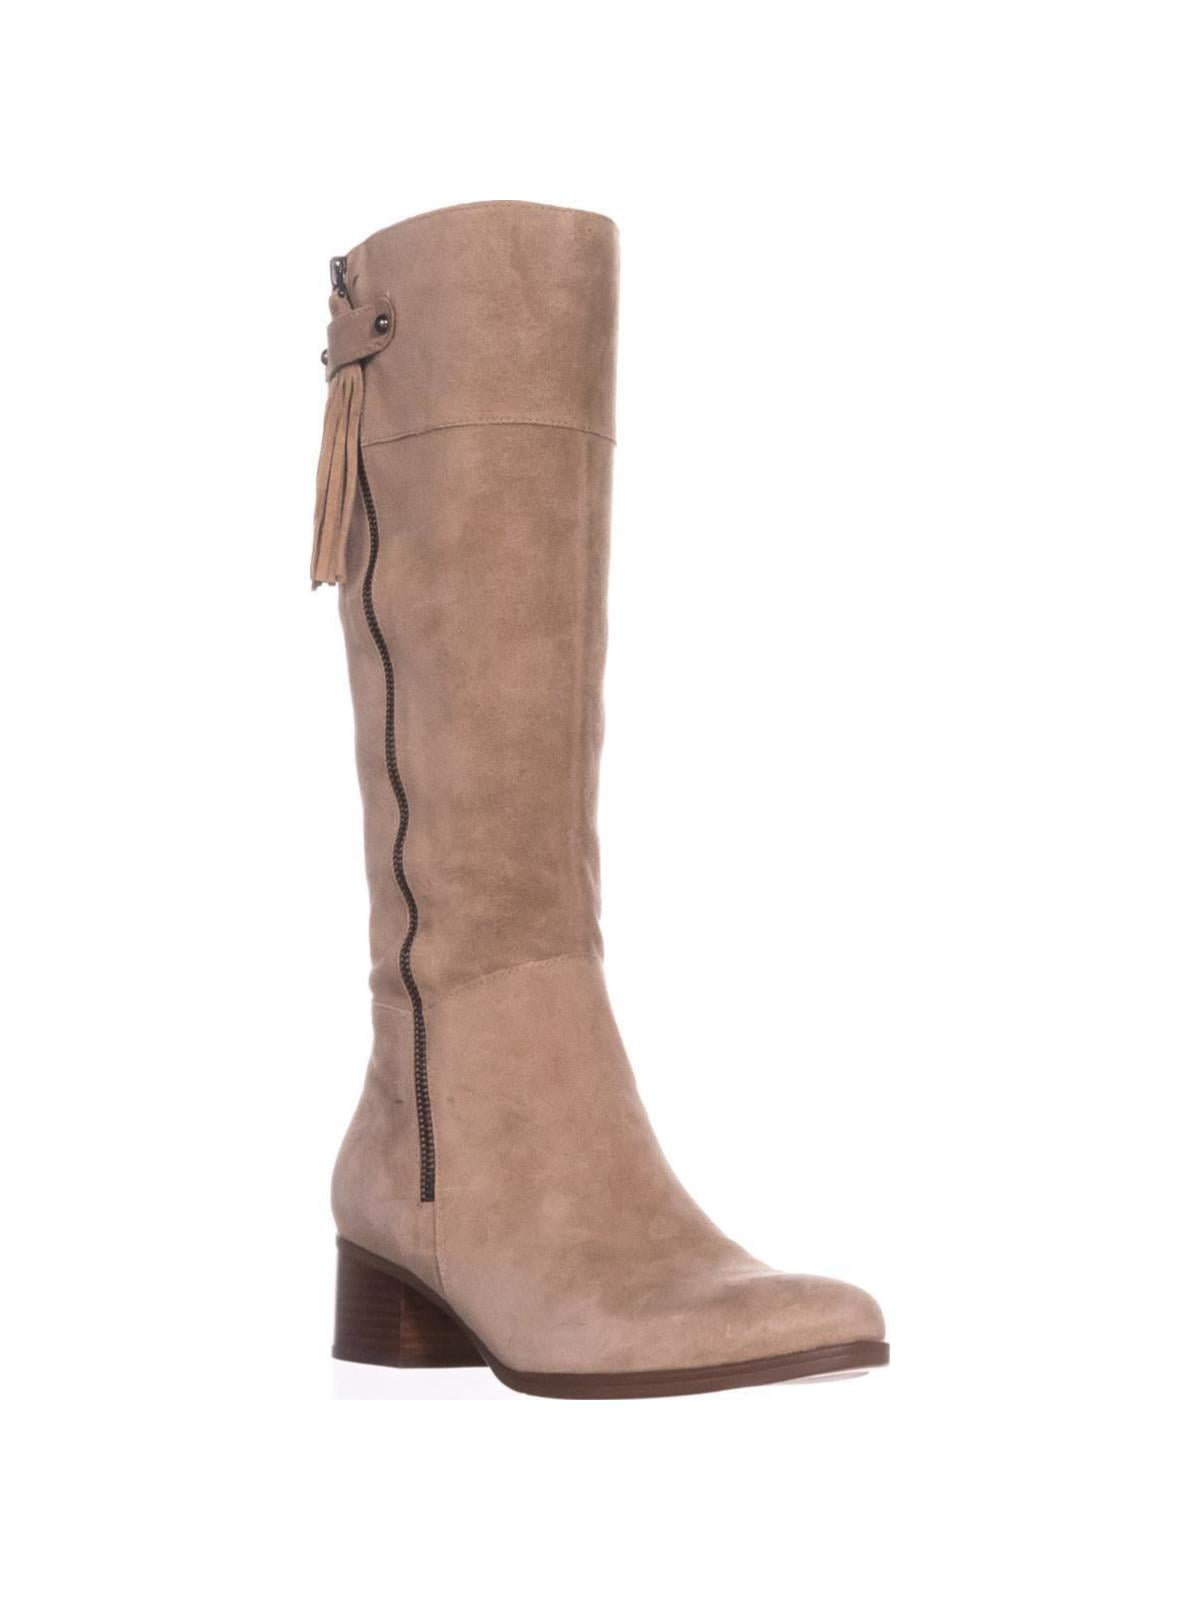 naturalizer Demi Riding Boots, Oatmeal 